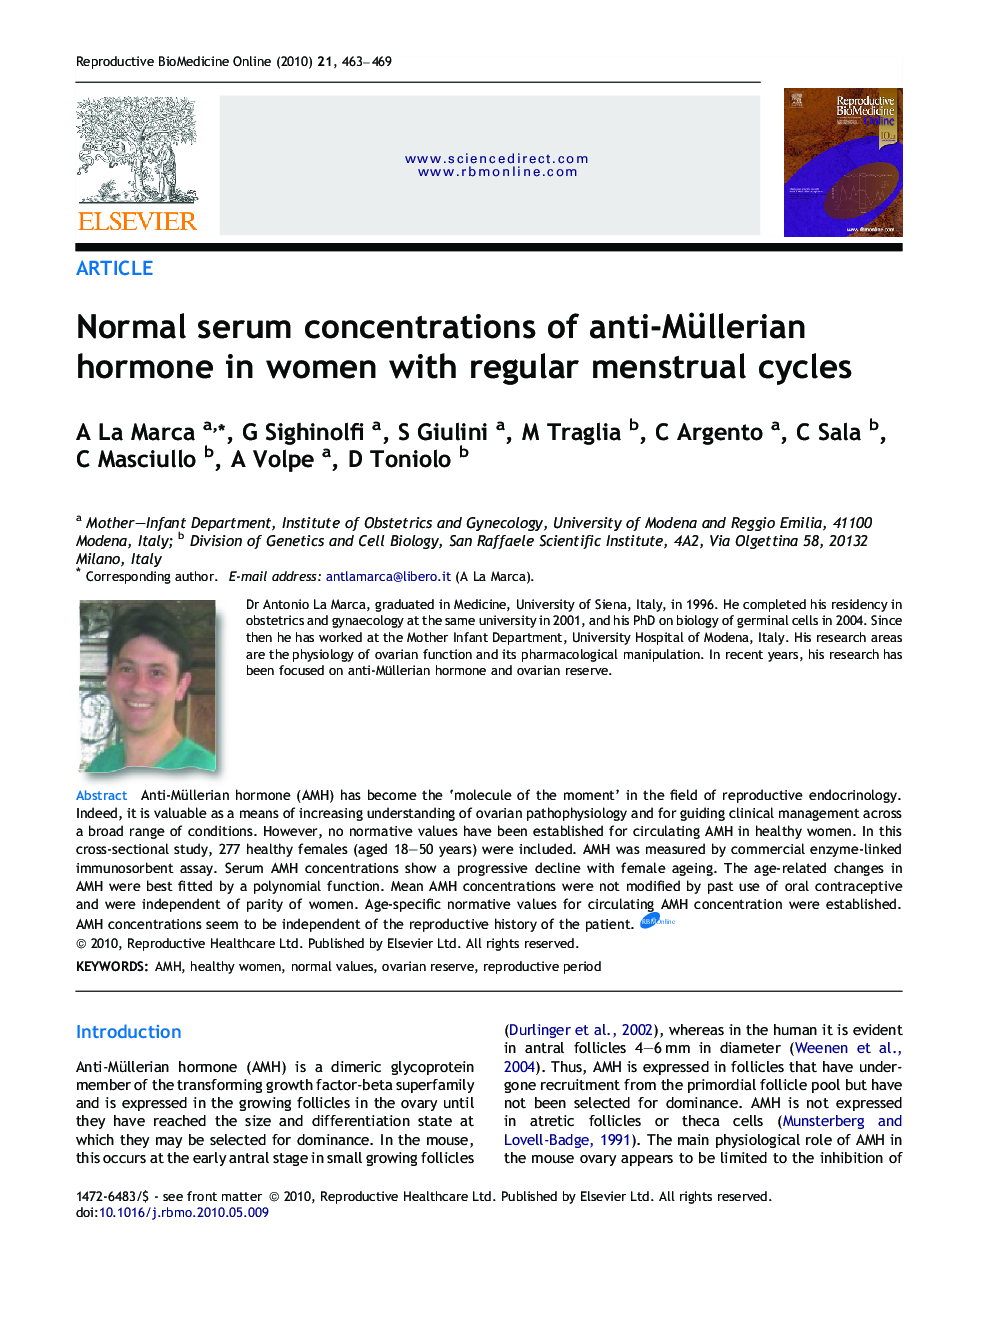 Normal serum concentrations of anti-Müllerian hormone in women with regular menstrual cycles 